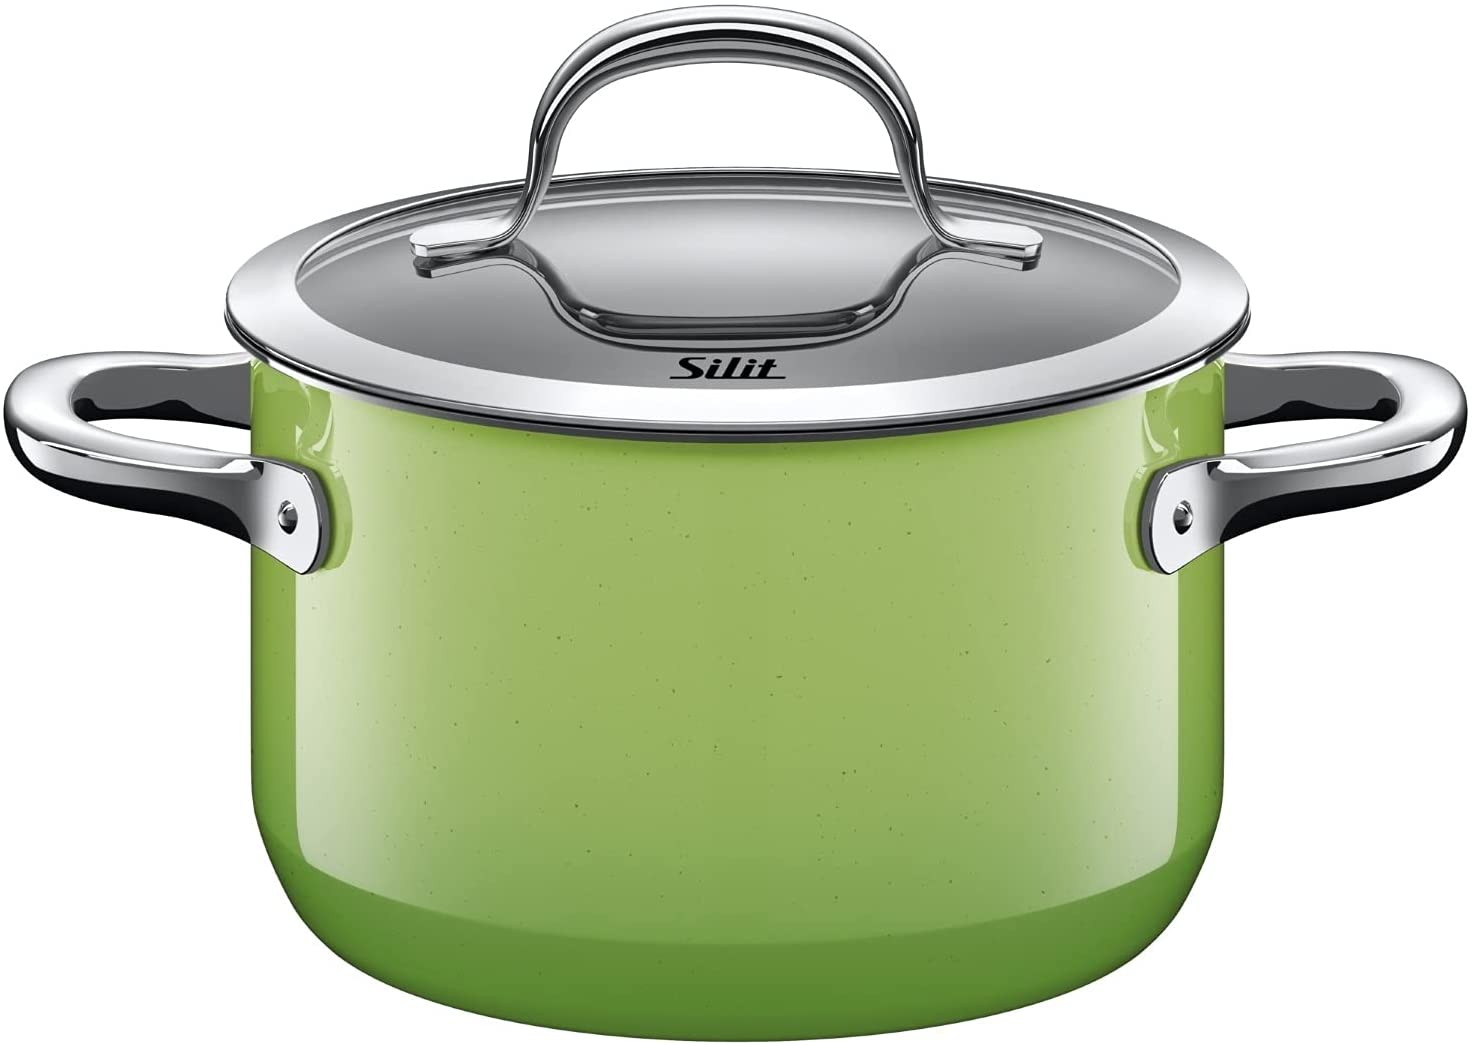 Silit 2102299189 Passion Tall Cooking Pot Diameter 16 cm 2 Litre Pouring Rim Ring Handle Glass Lid Silargan Function Ceramic Suitable for Induction Cookers Dishwasher Safe Green Enamel